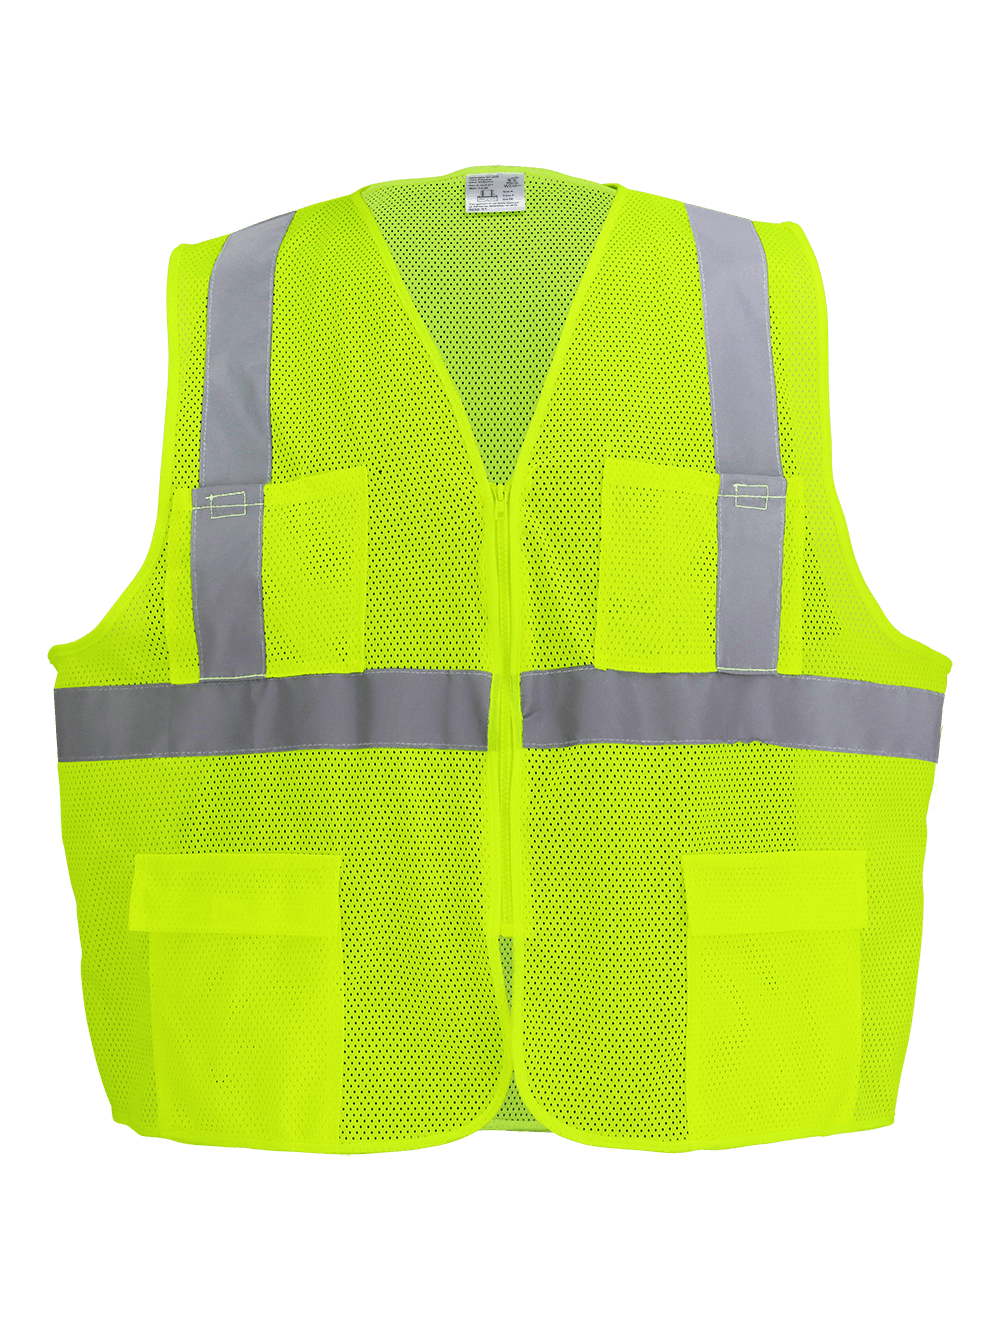 FrogWear® HV High-Visibility Yellow/Green Lightweight Mesh Safety Vest, ANSI Class 2 - GLO-271